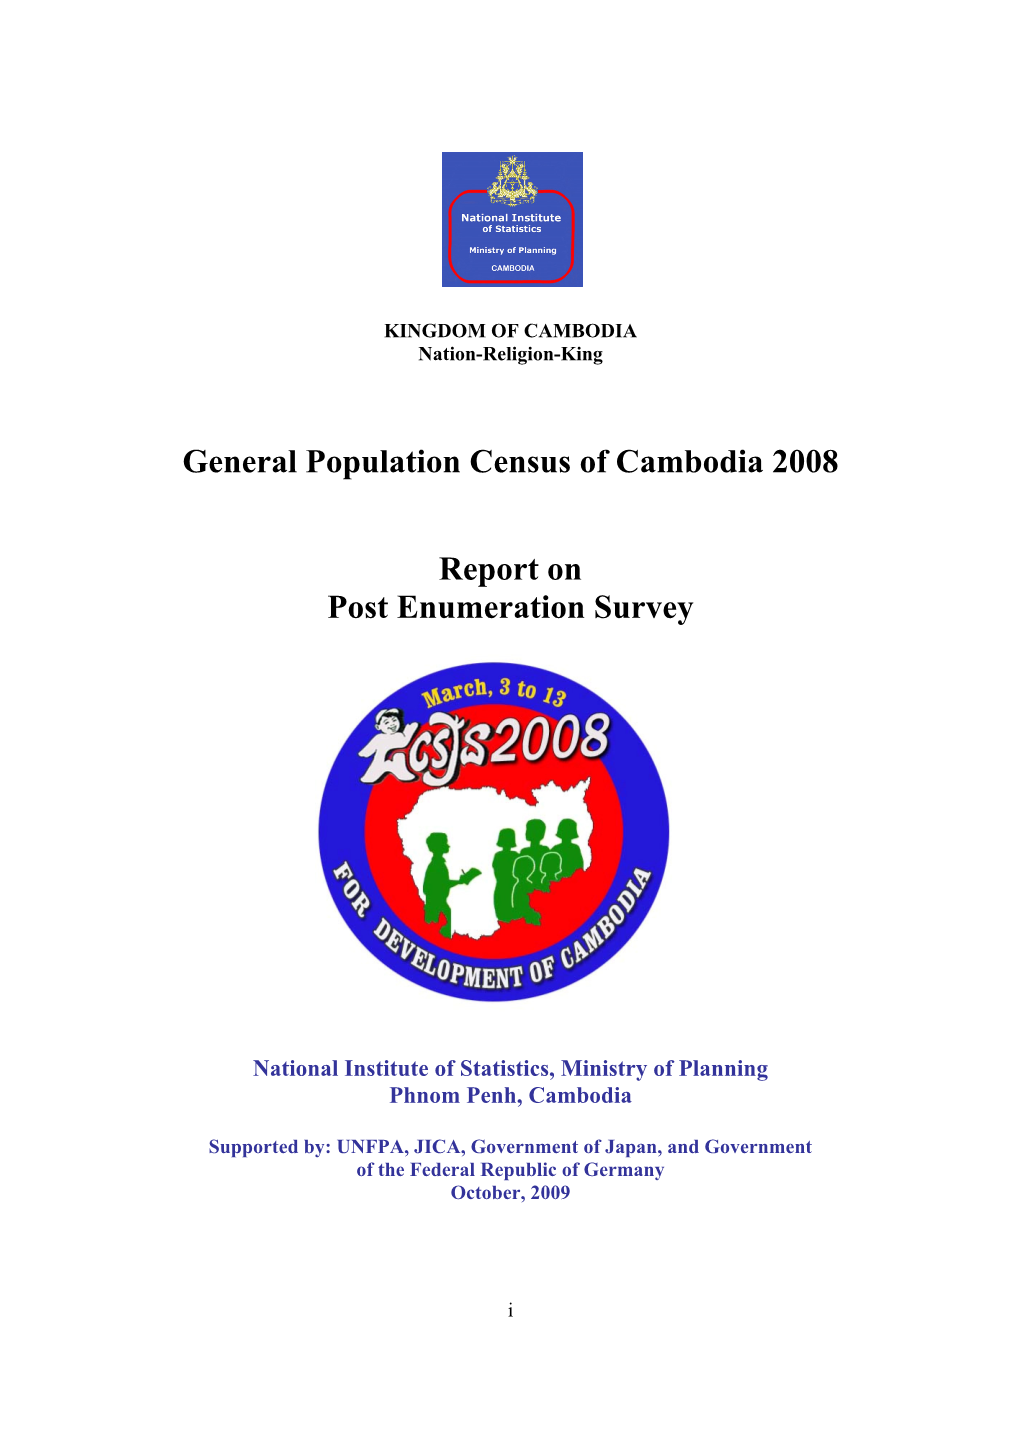 General Population Census of Cambodia 2008 Report on Post